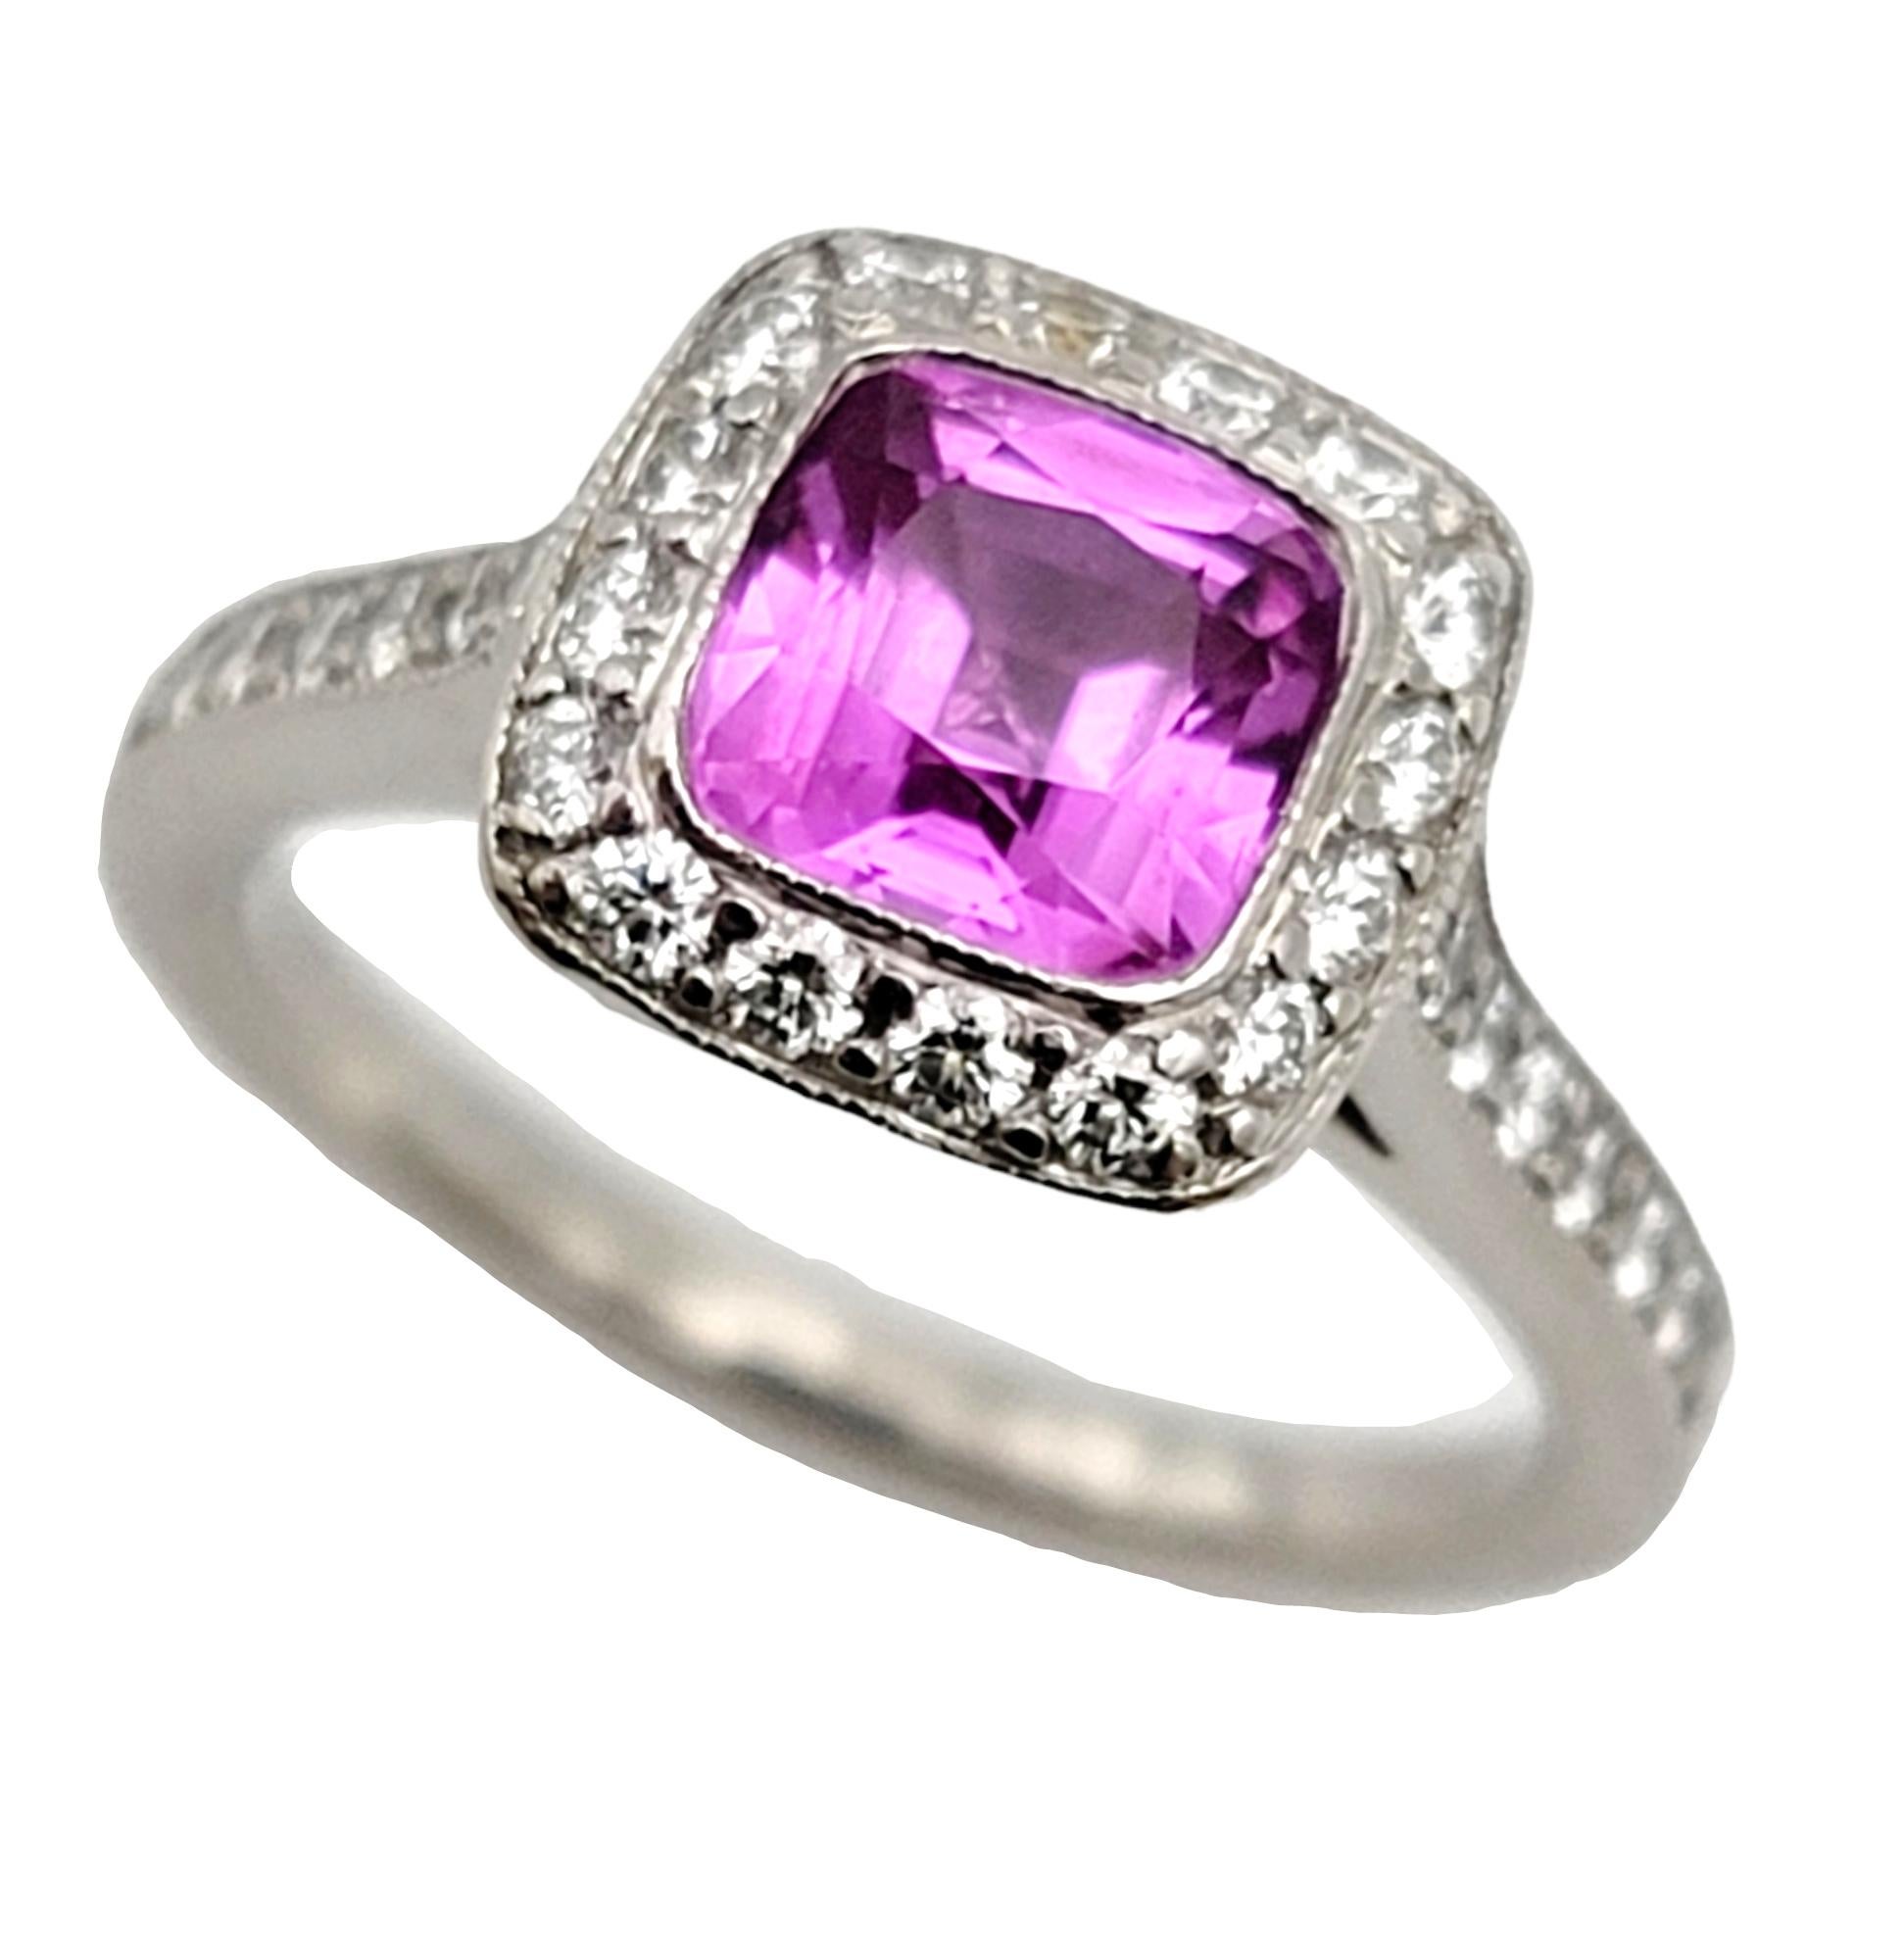 Ring Size 4.5 

Breathtaking pink sapphire and diamond halo Legacy engagement ring from Tiffany & Co.. This vibrant, ultra feminine ring was inspired by the glamour of the Edwardian period and will absolutely radiate on her finger. The striking pink